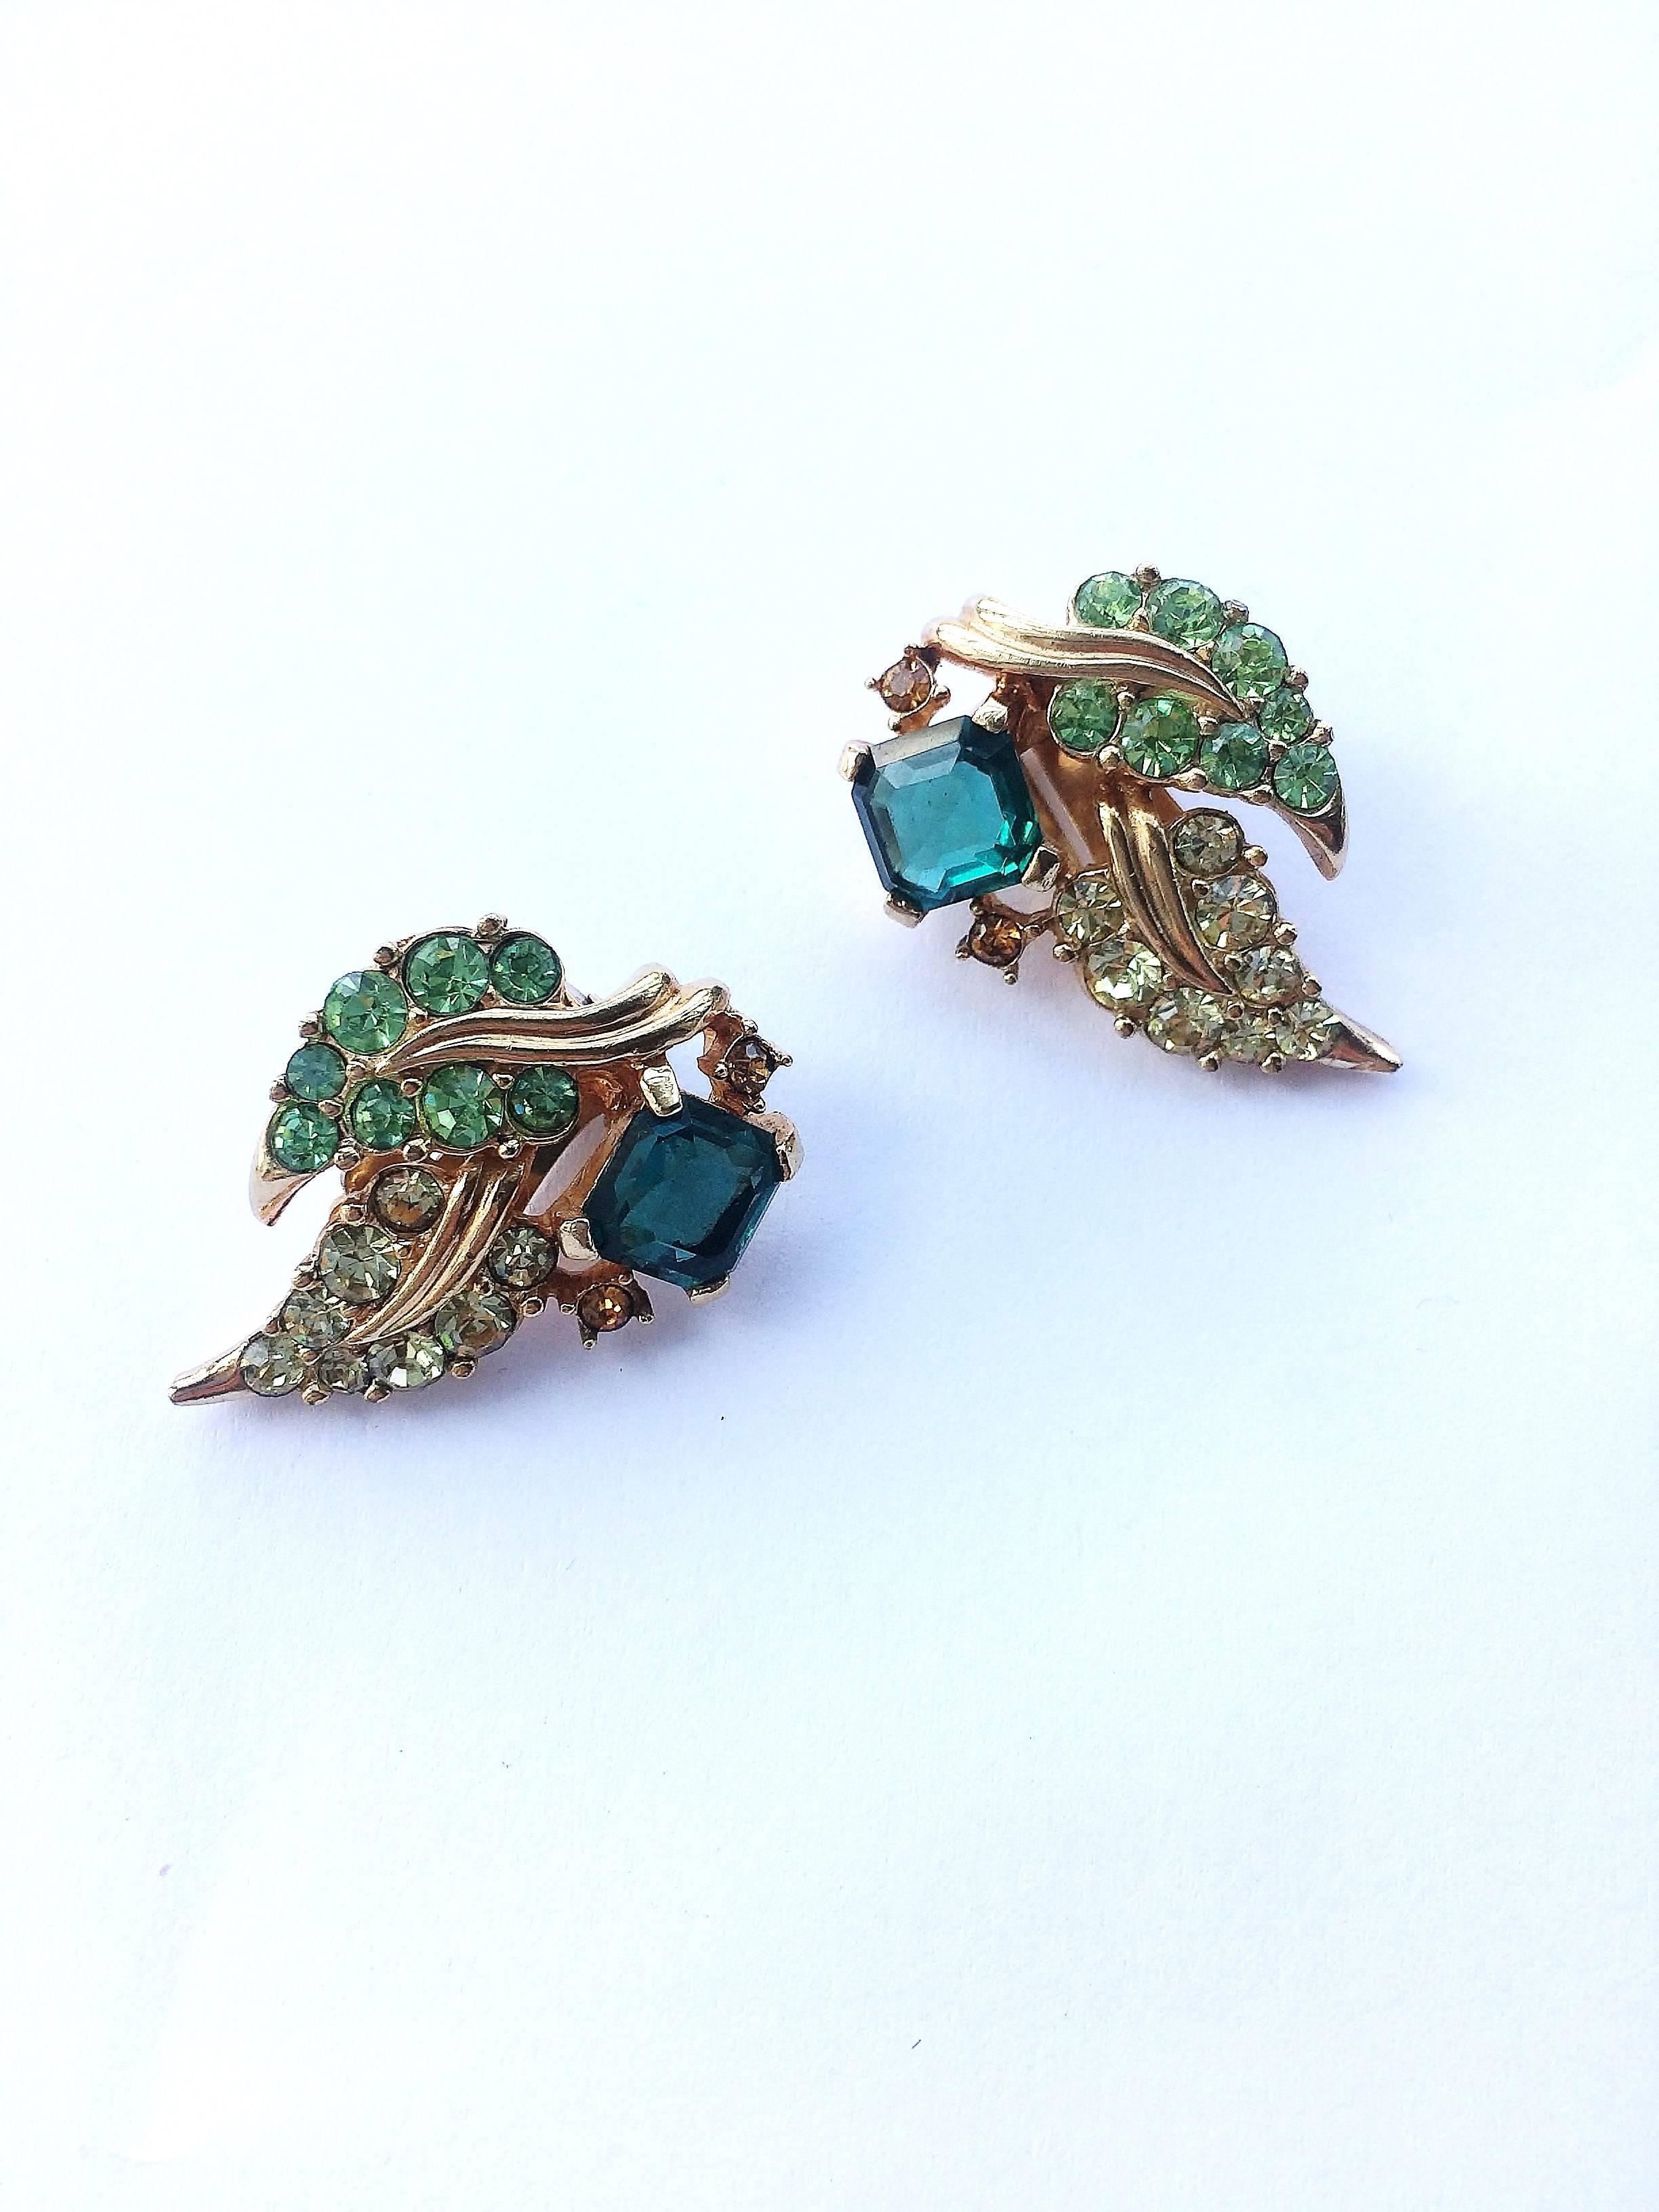 Exquisite multi coloured and multi shaped paste earrings by Marcel Boucher, in peridot, and citrine smaller paste with square cut 'emerald' pastes - reminiscent of Cartier or Van Cleef and Arpels jewellery. Fresh and light colours giving a very